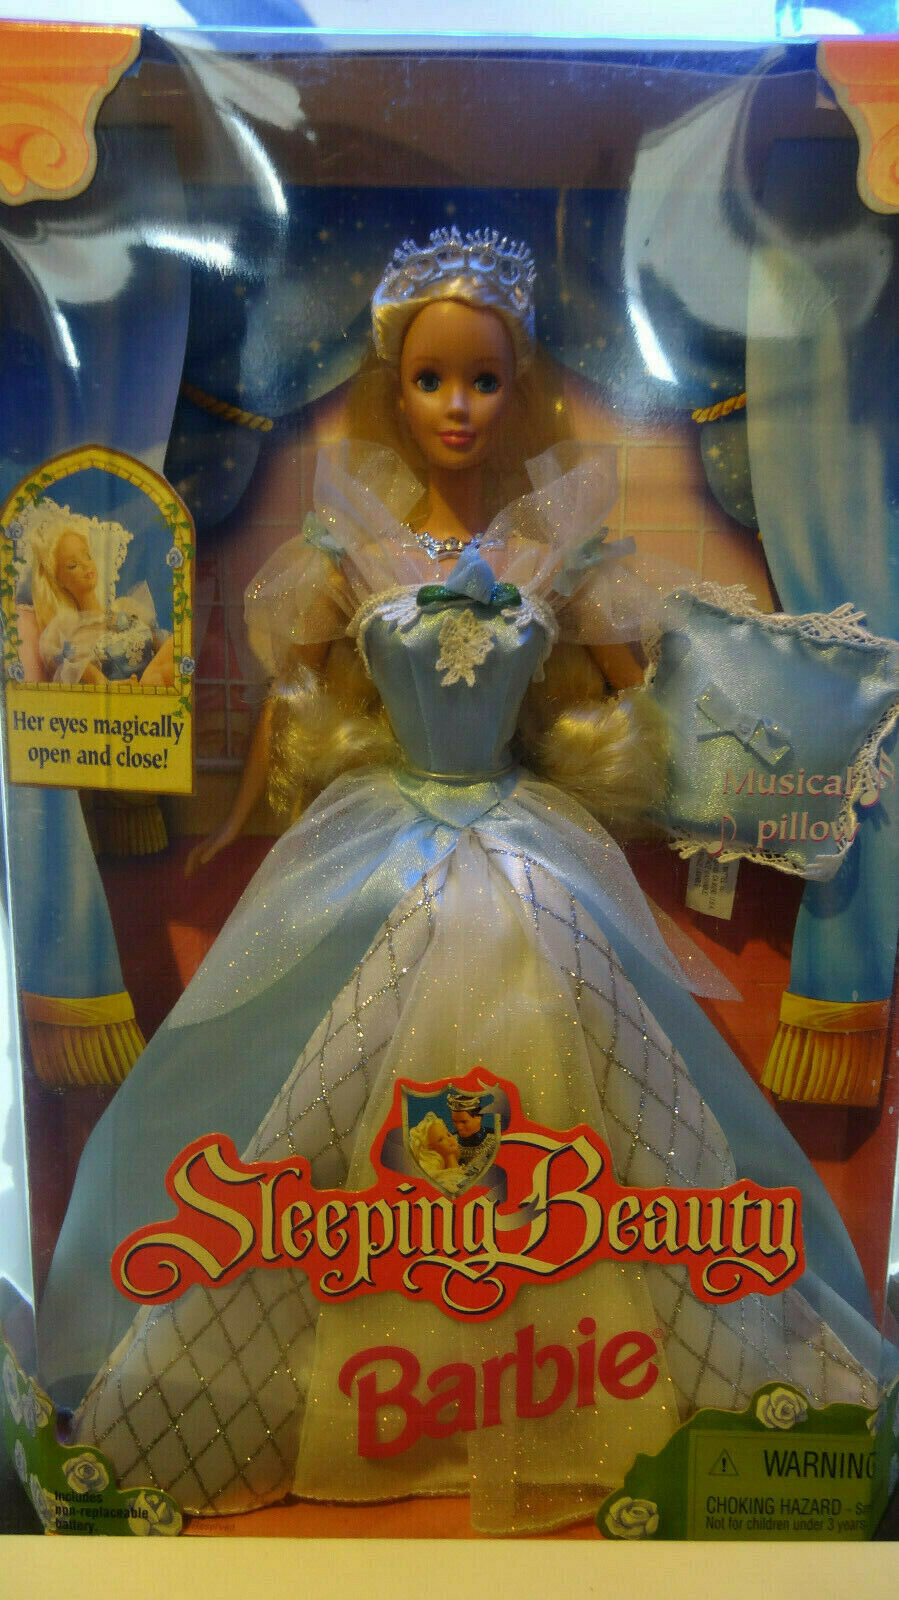 Mattel Sleeping Beauty Barbie Doll Nib Never Opened Collectors Edition Great